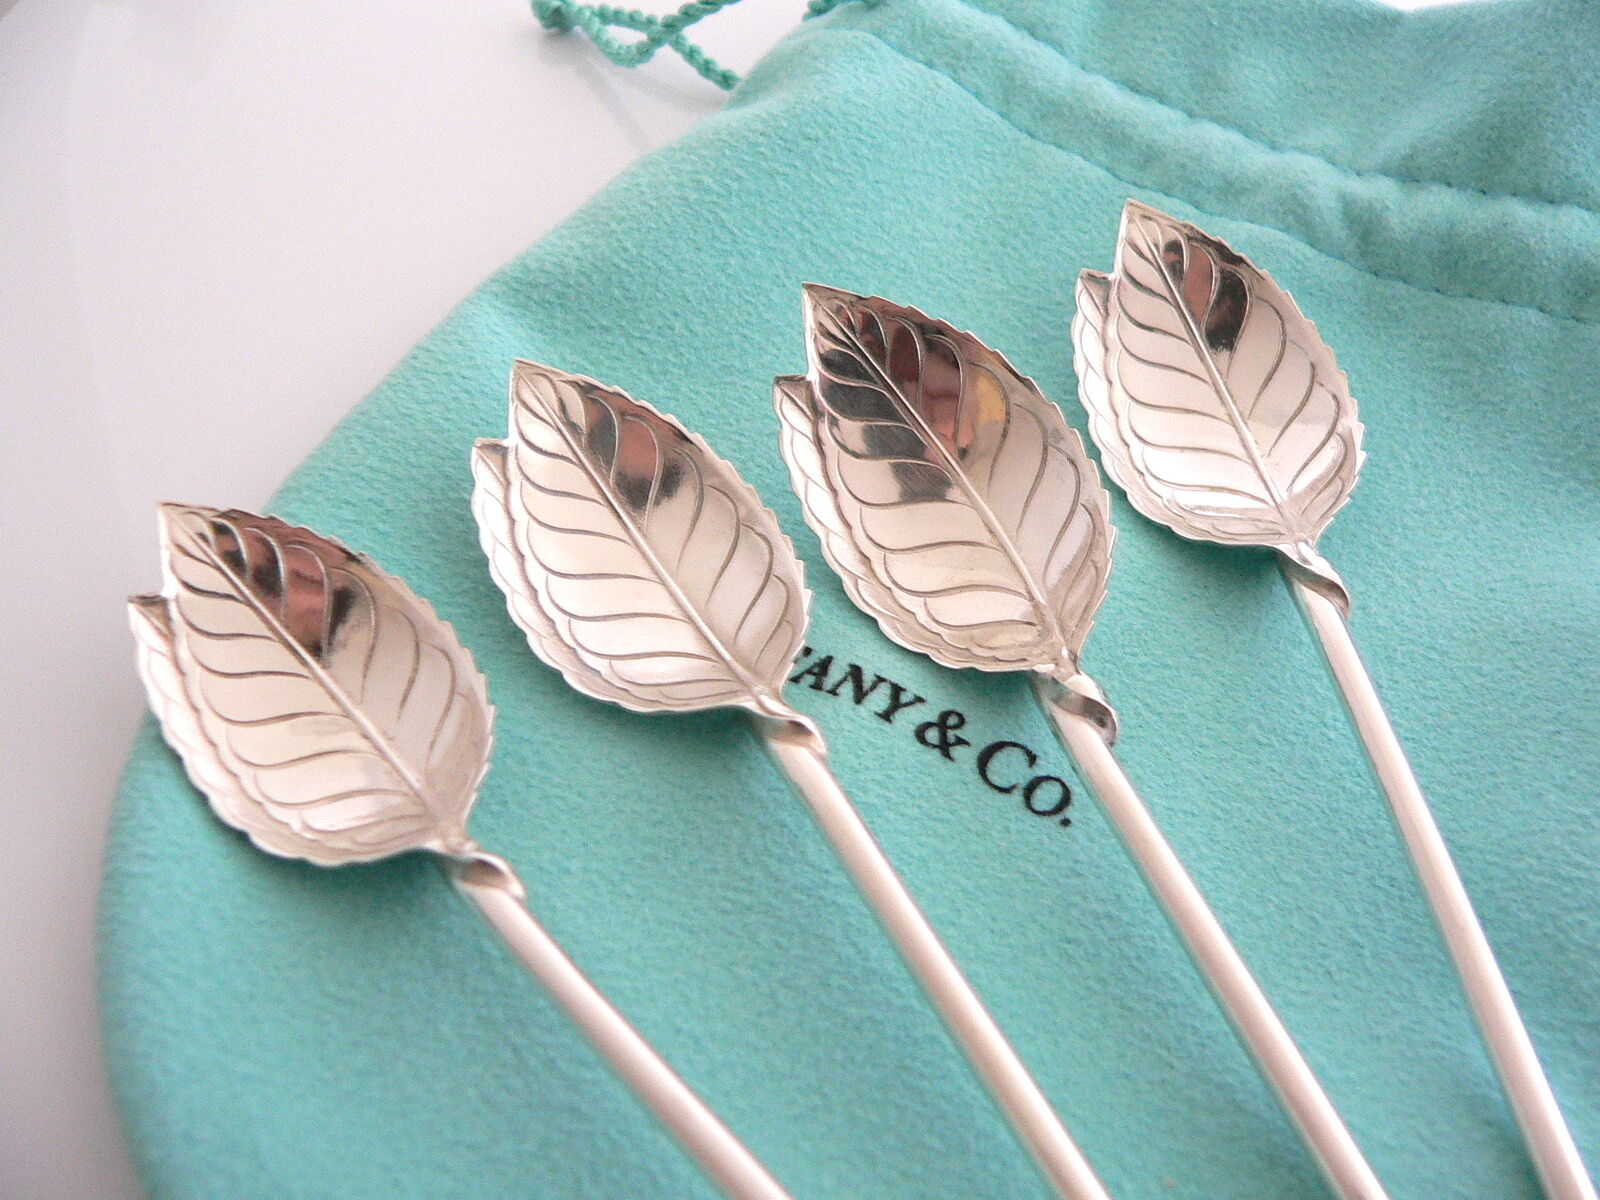 Set of 6 Tiffany and Co. Sterling Silver Leaf Form Ice Tea Straws